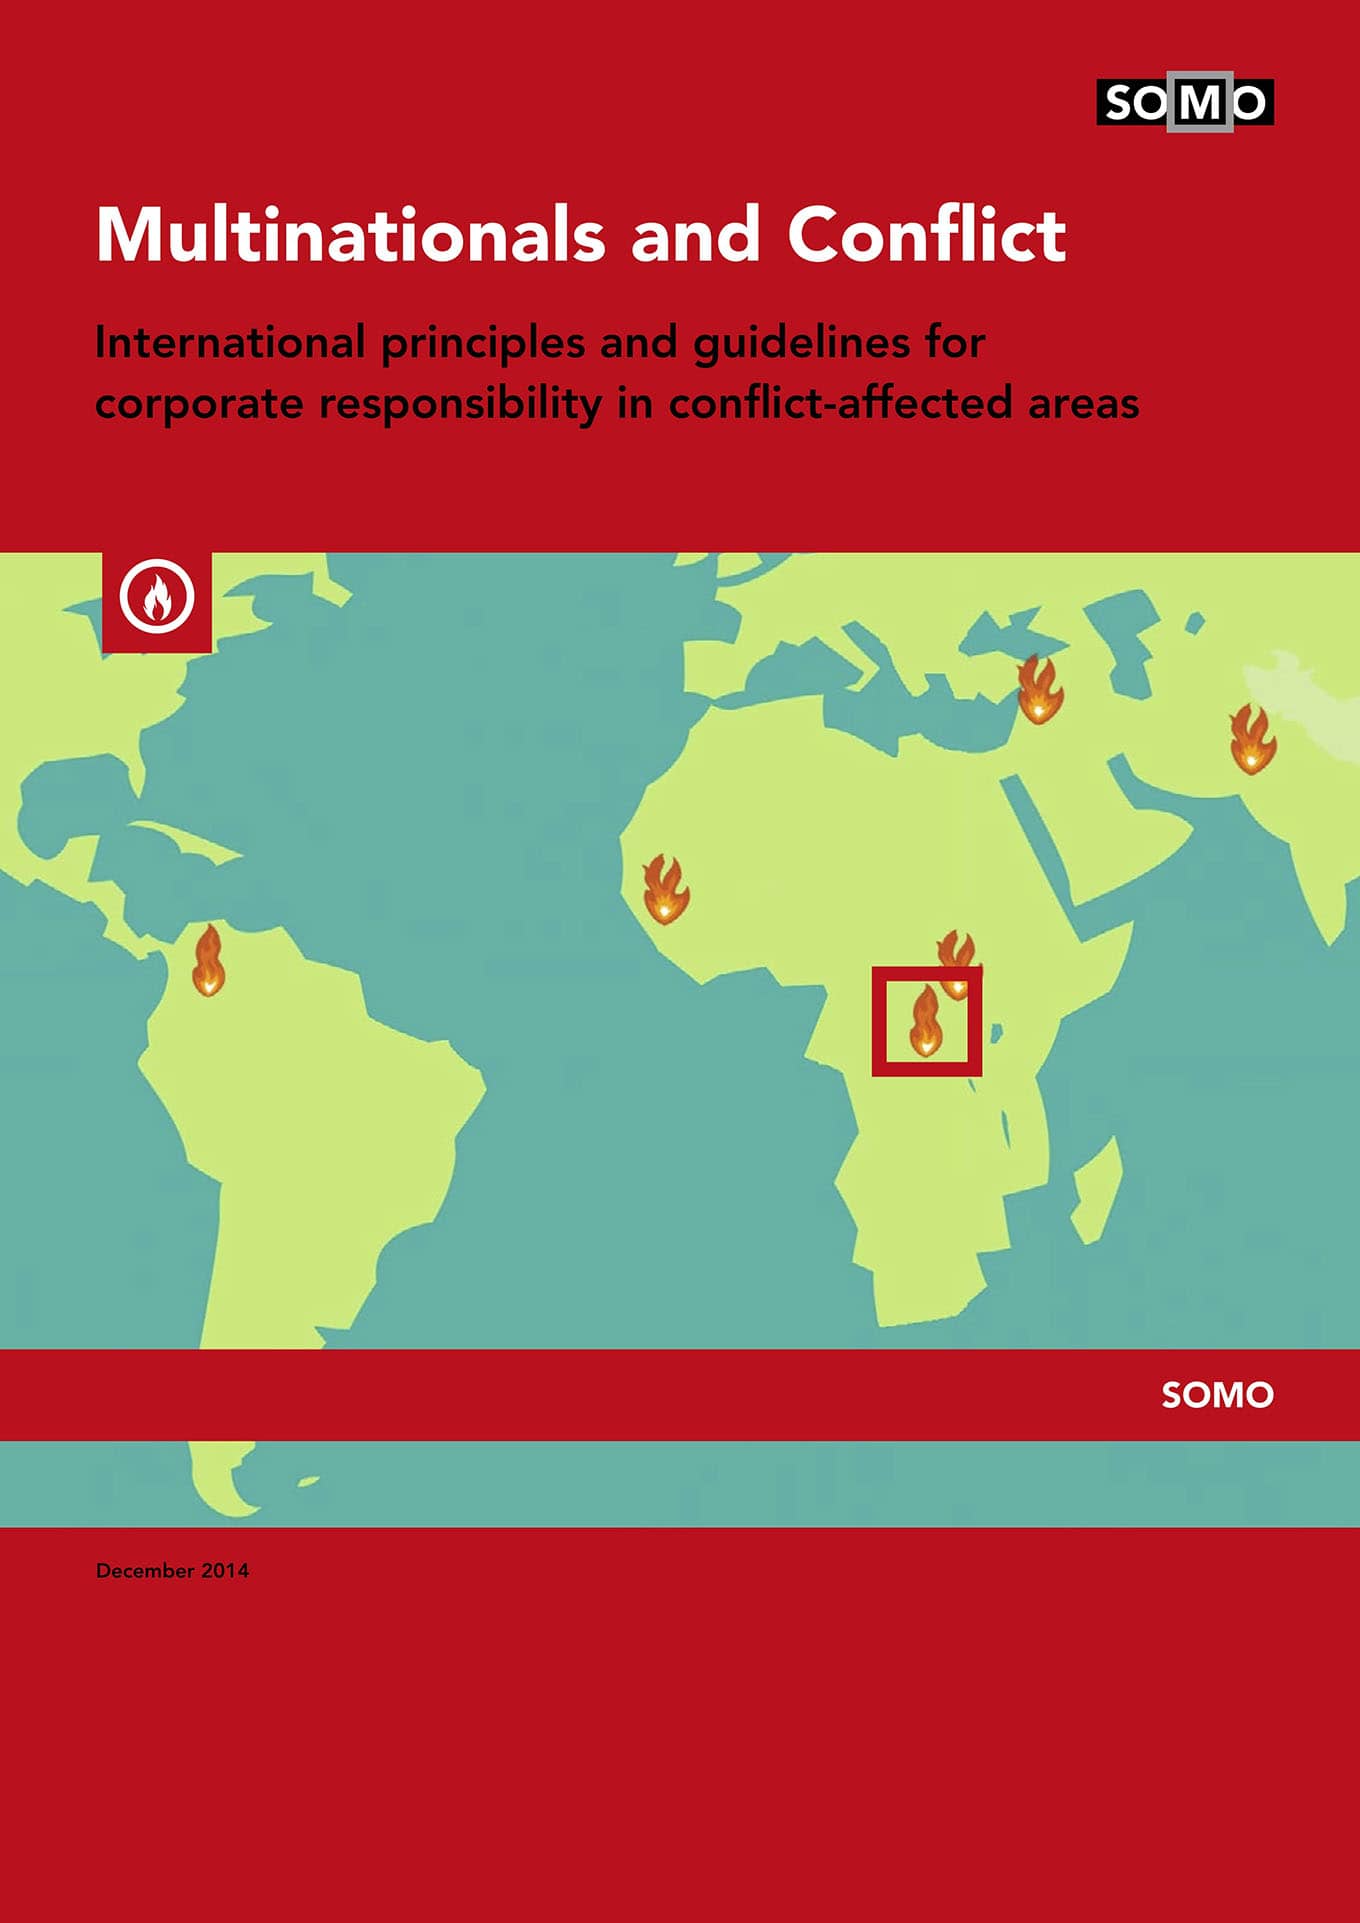  Multinationals and Conflict – International Principles and Guidelines for Corporate Responsibility in Conflict-affected Areas (SOMO, 2014)